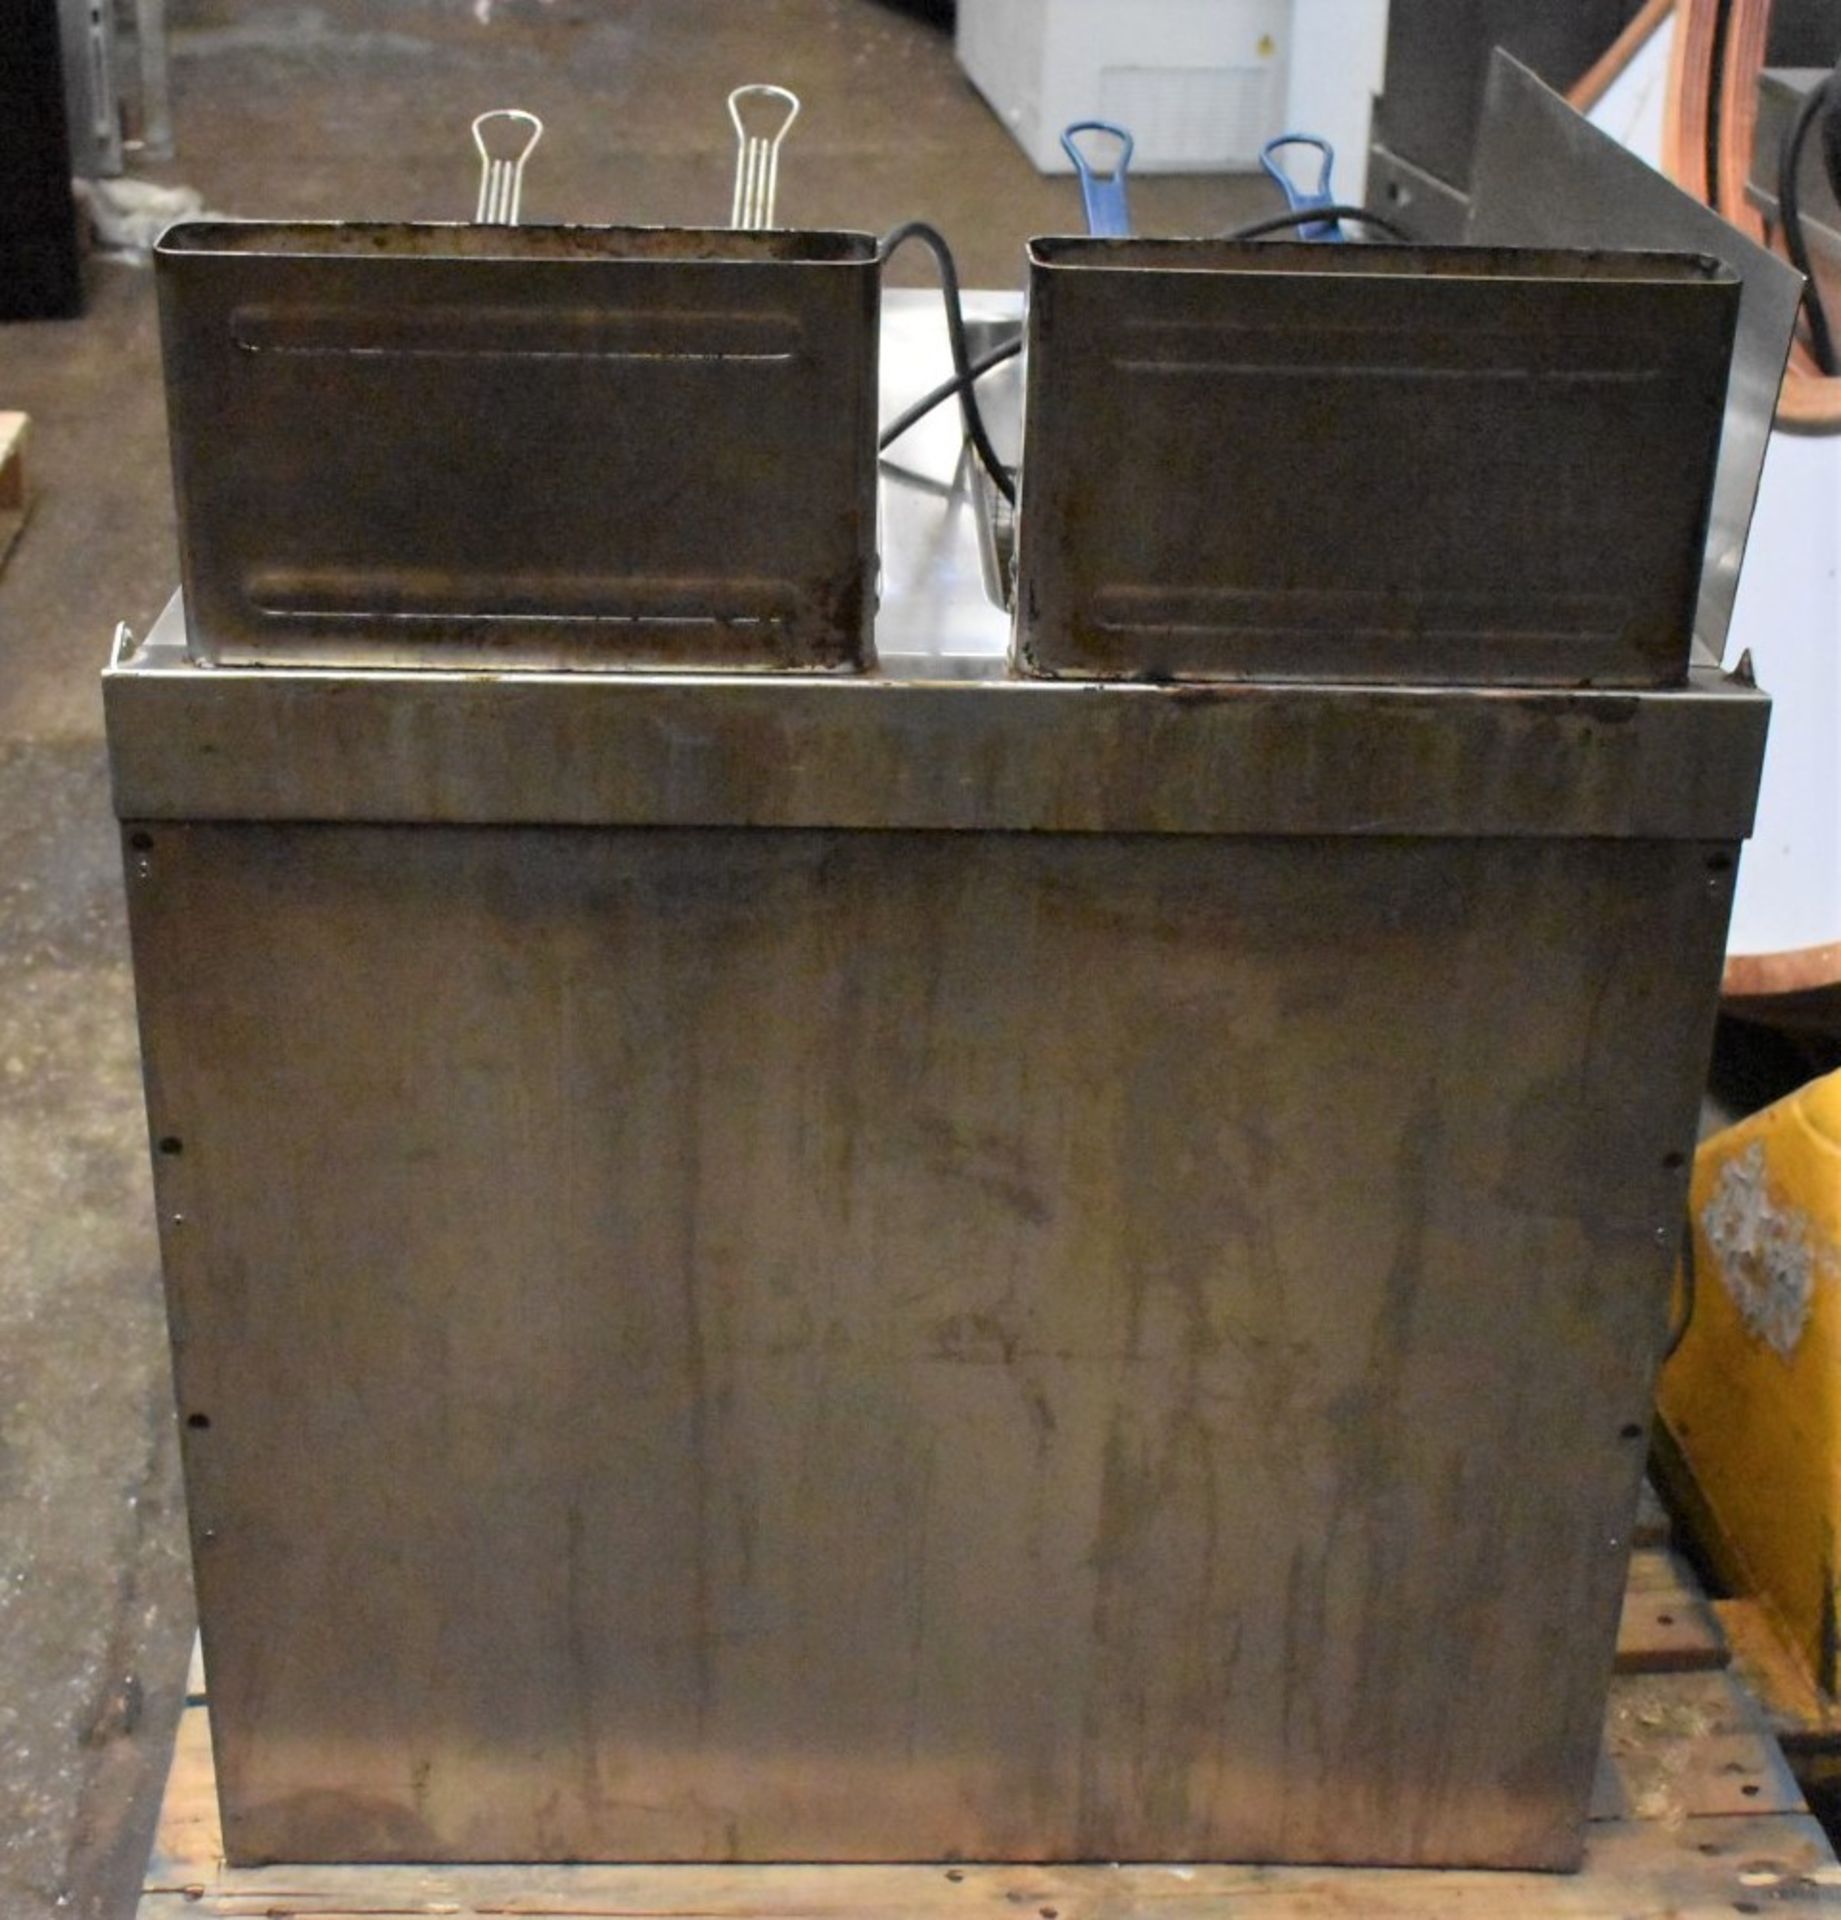 1 x Angelo Po Twin Tank Commercial Fryer - Includes Baskets - Removed From a Commercial Kitchen - Image 13 of 17